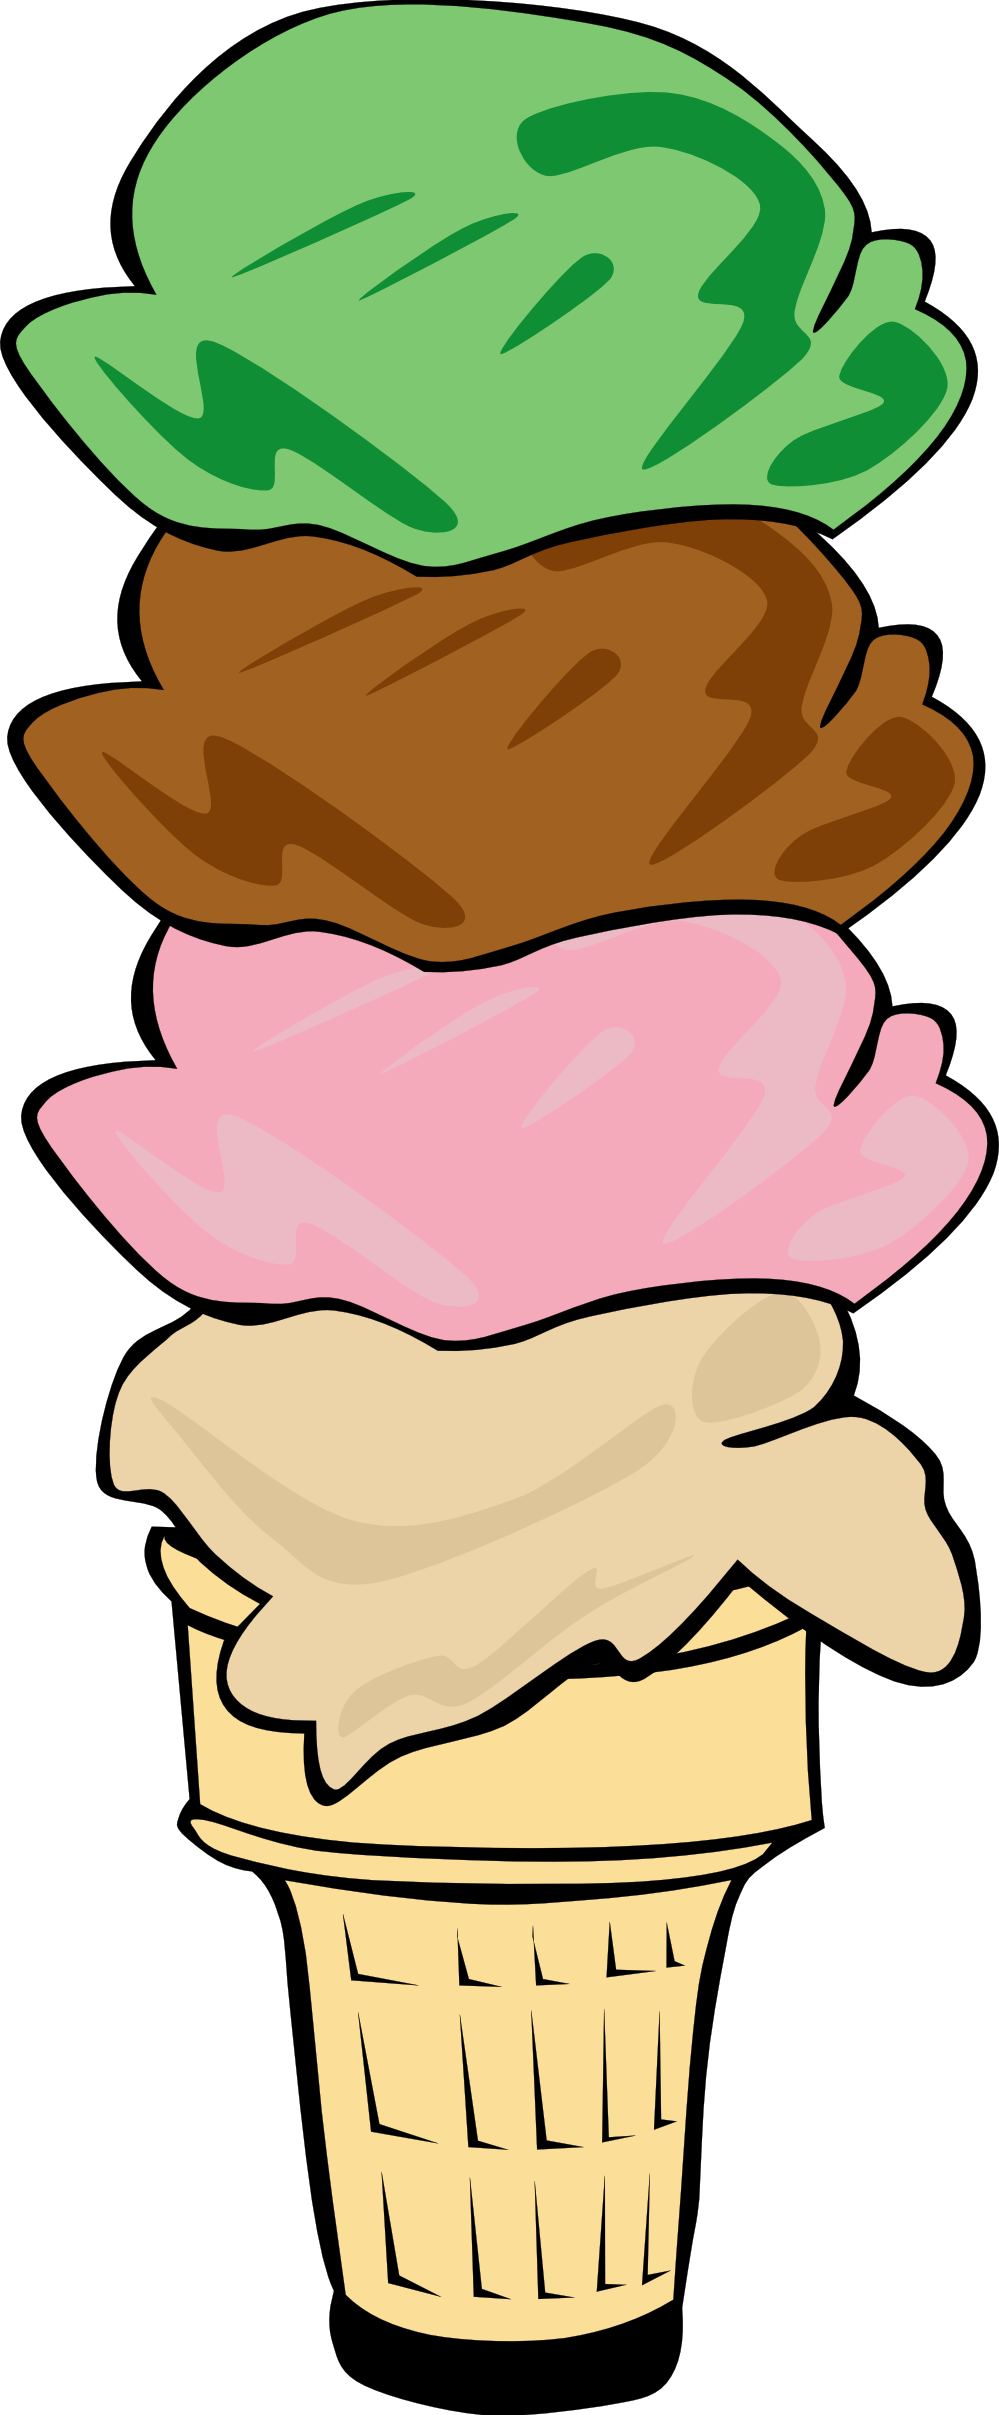 Ice Cream Cone Clip Art | Clipart library - Free Clipart Images